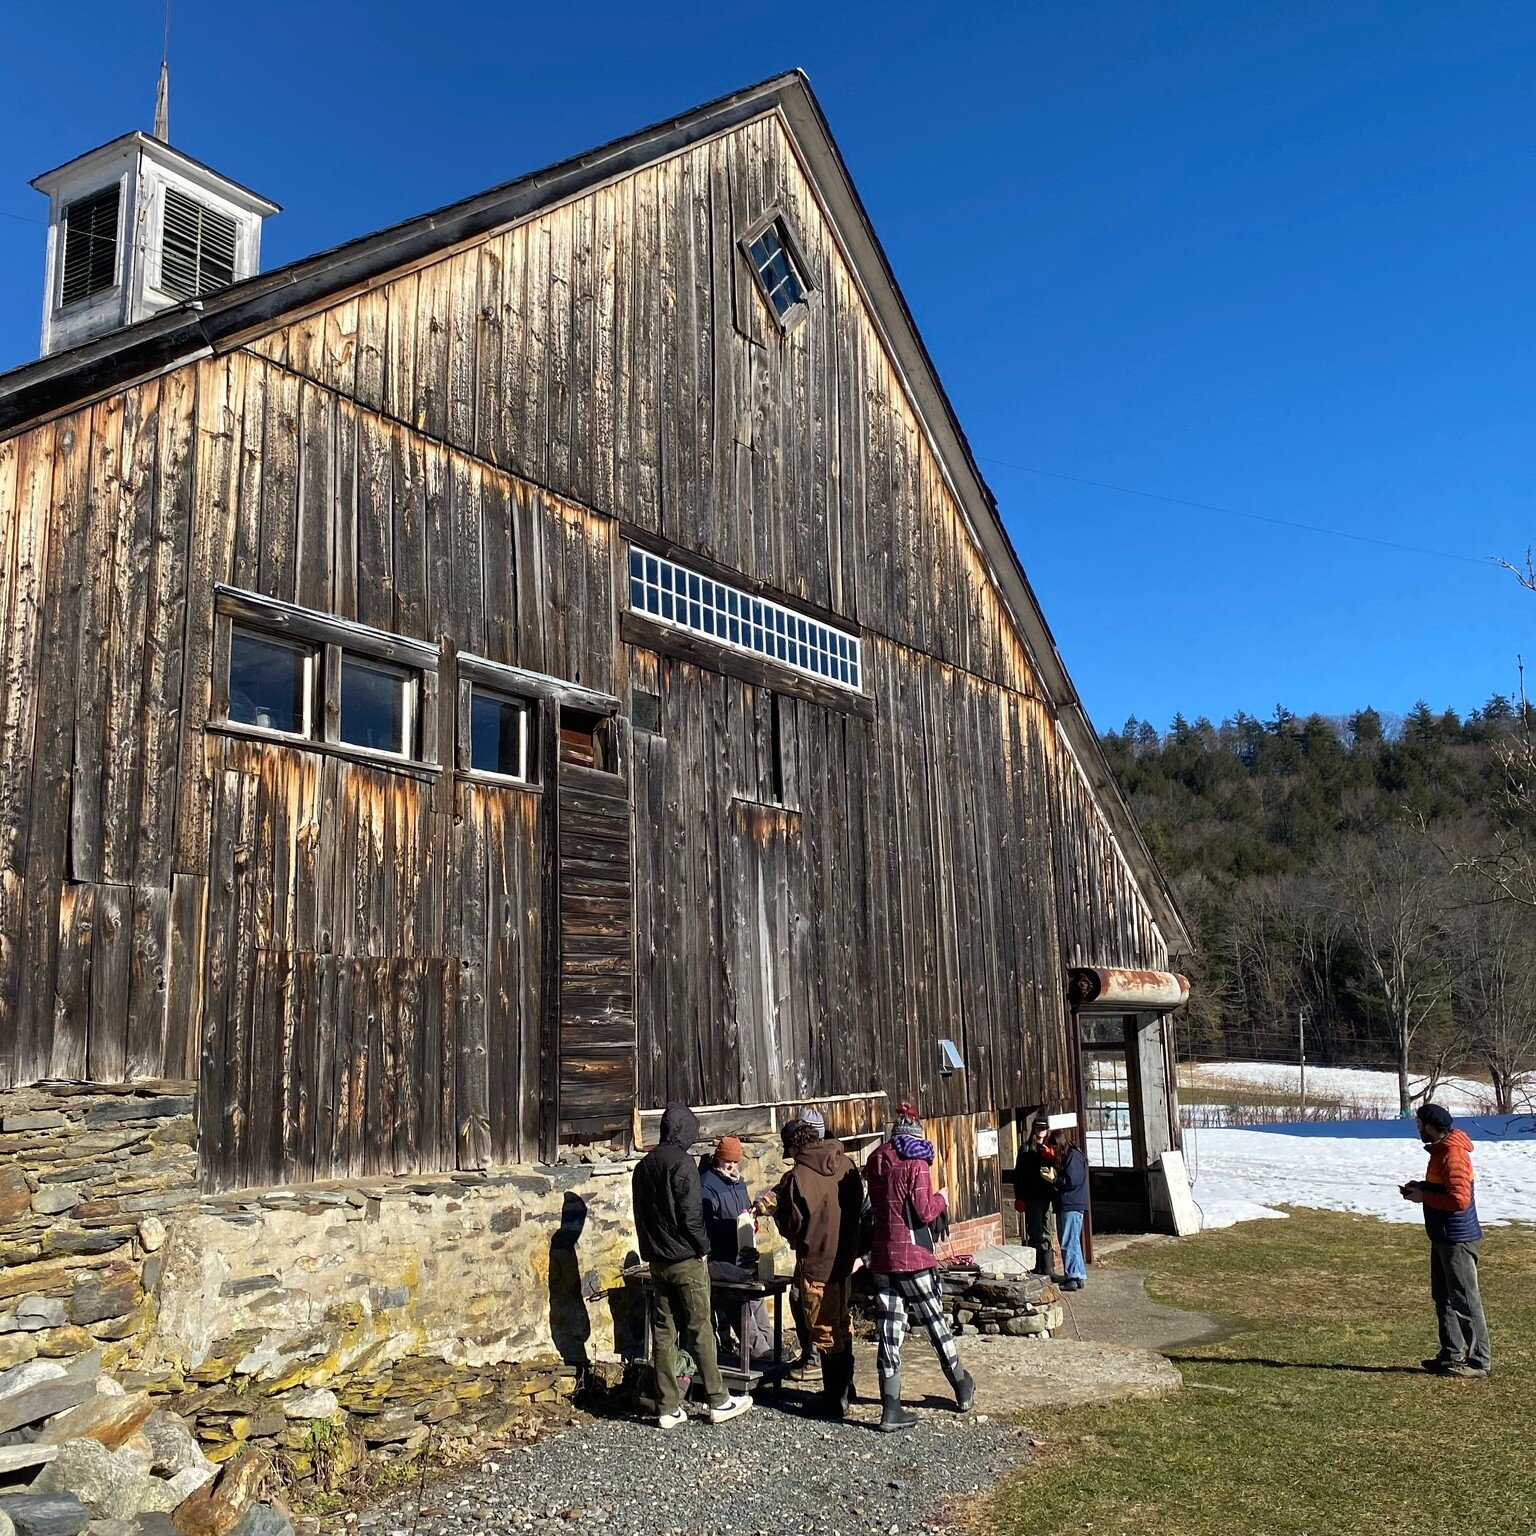 We were glad to welcome students in the Journey Away program from Leland &amp; Gray Middle and High School in Townshend, VT, to Scott Farm last month as part of their unique &quot;expeditionary learning&quot; semester learning about food systems both